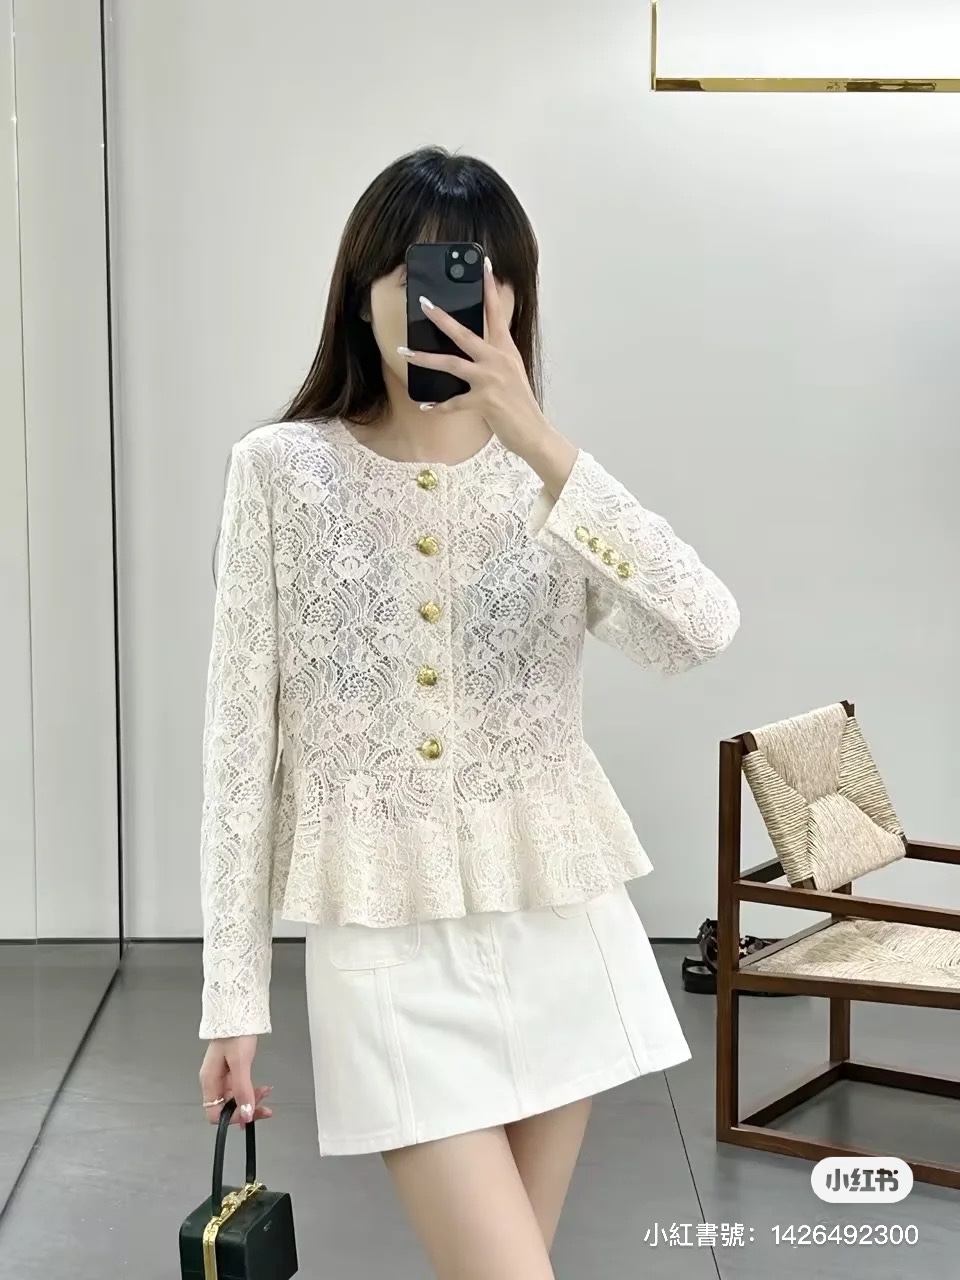 Celine Clothing Cardigans Coats & Jackets Replica Sale online
 Embroidery Lace Spring Collection Long Sleeve